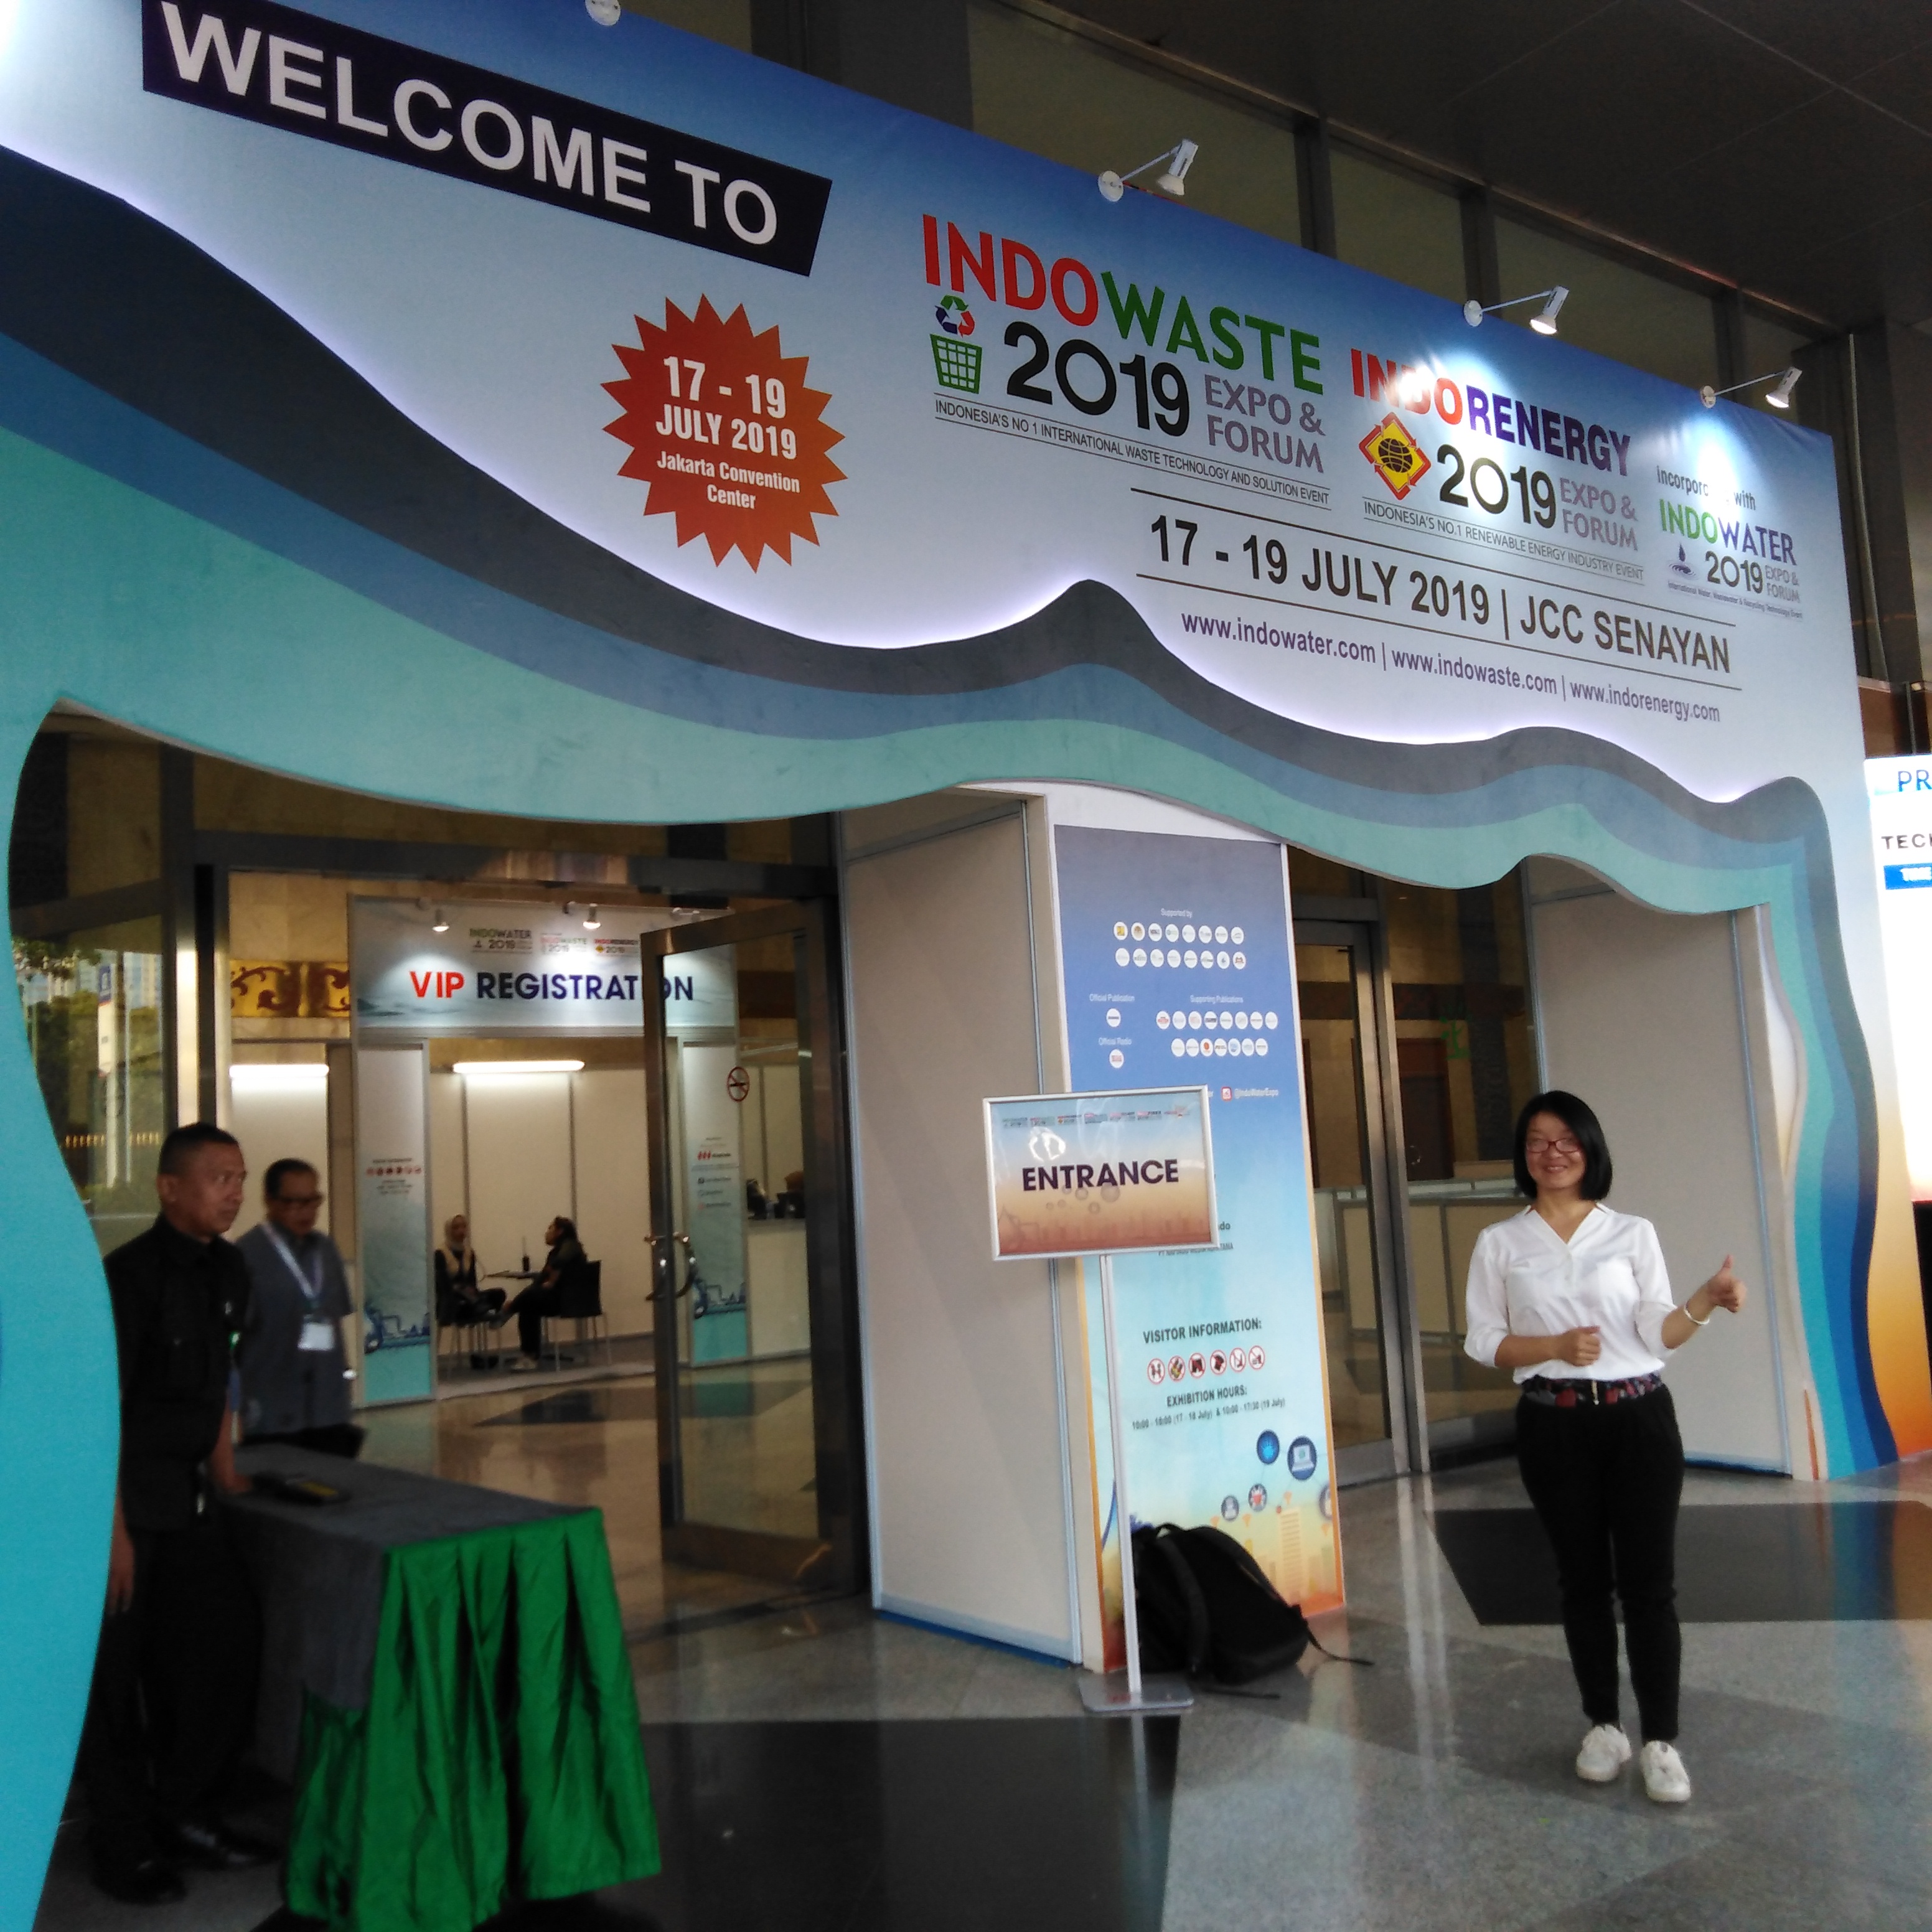 Probest attended the INDO WATER exhibition in Indonesia